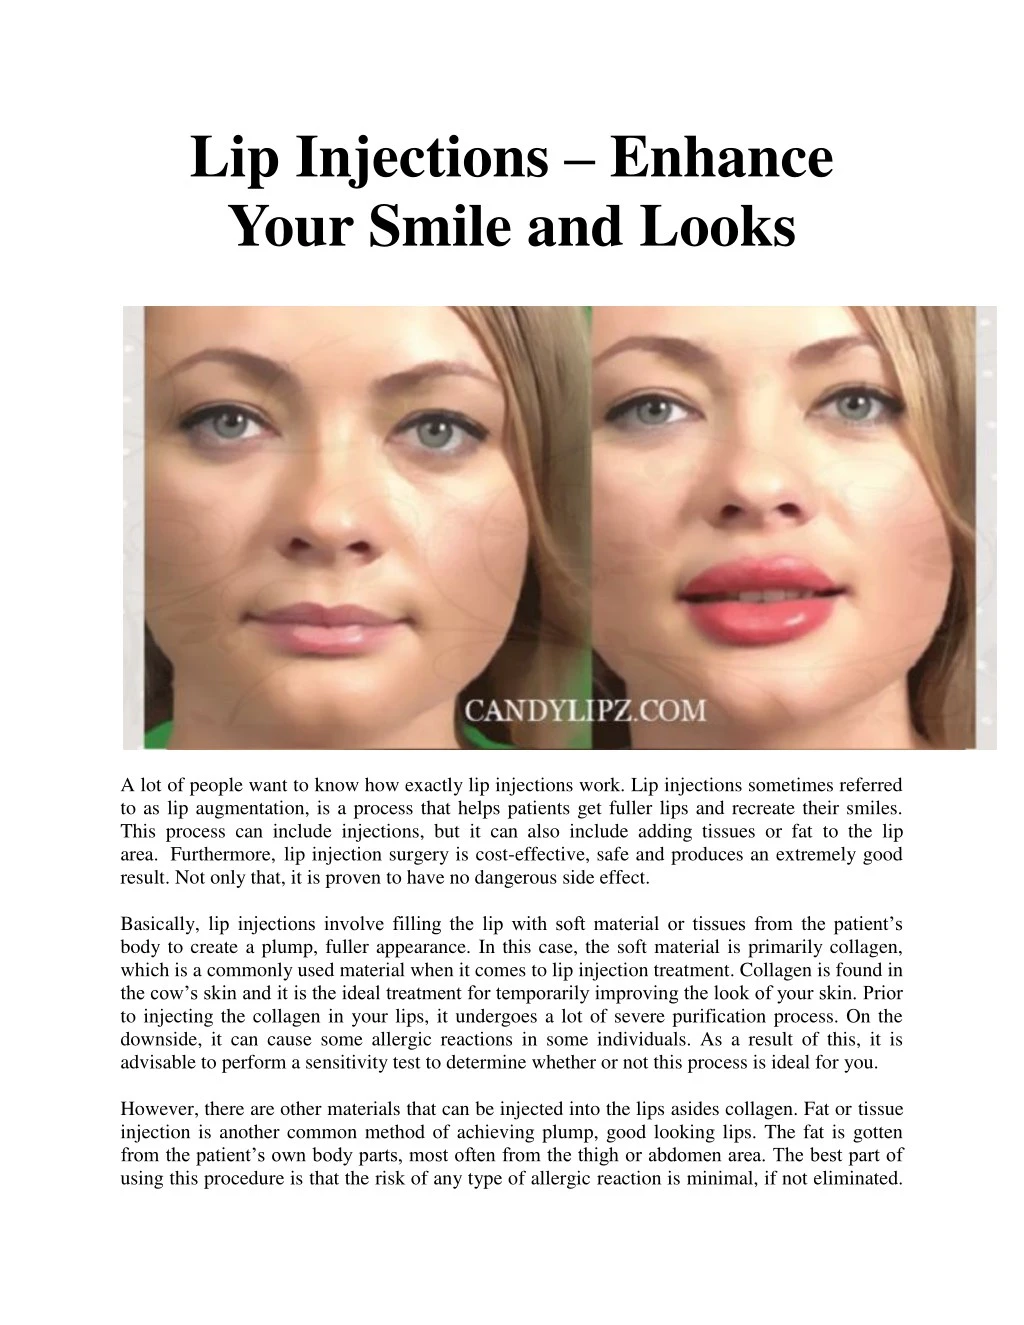 lip injections enhance your smile and looks